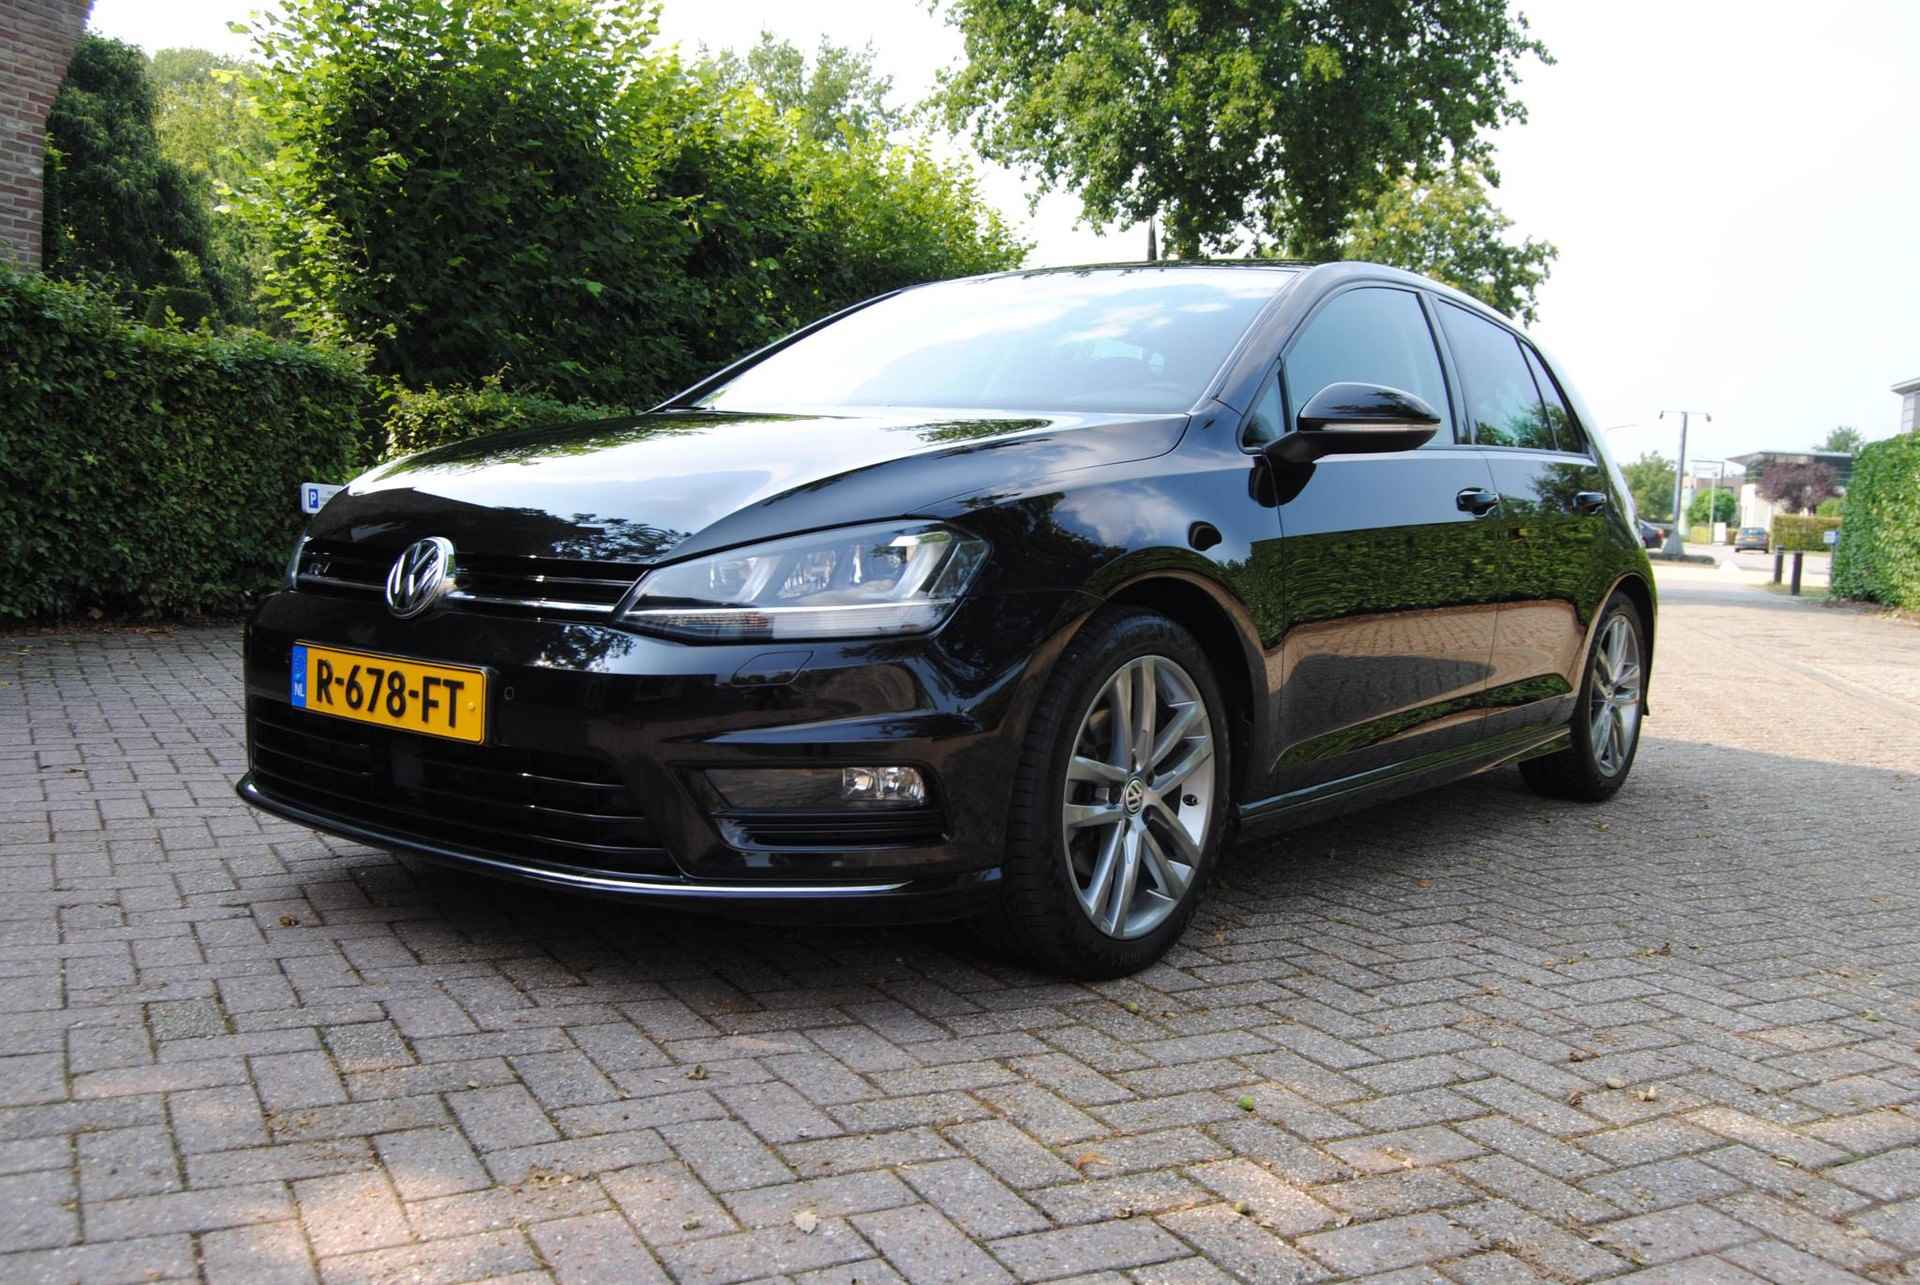 Volkswagen Golf 1.4 TSI Highline Business R-Line Navigatie, adaptive cruise controle, Bluetooth, Climate controle - 10/27